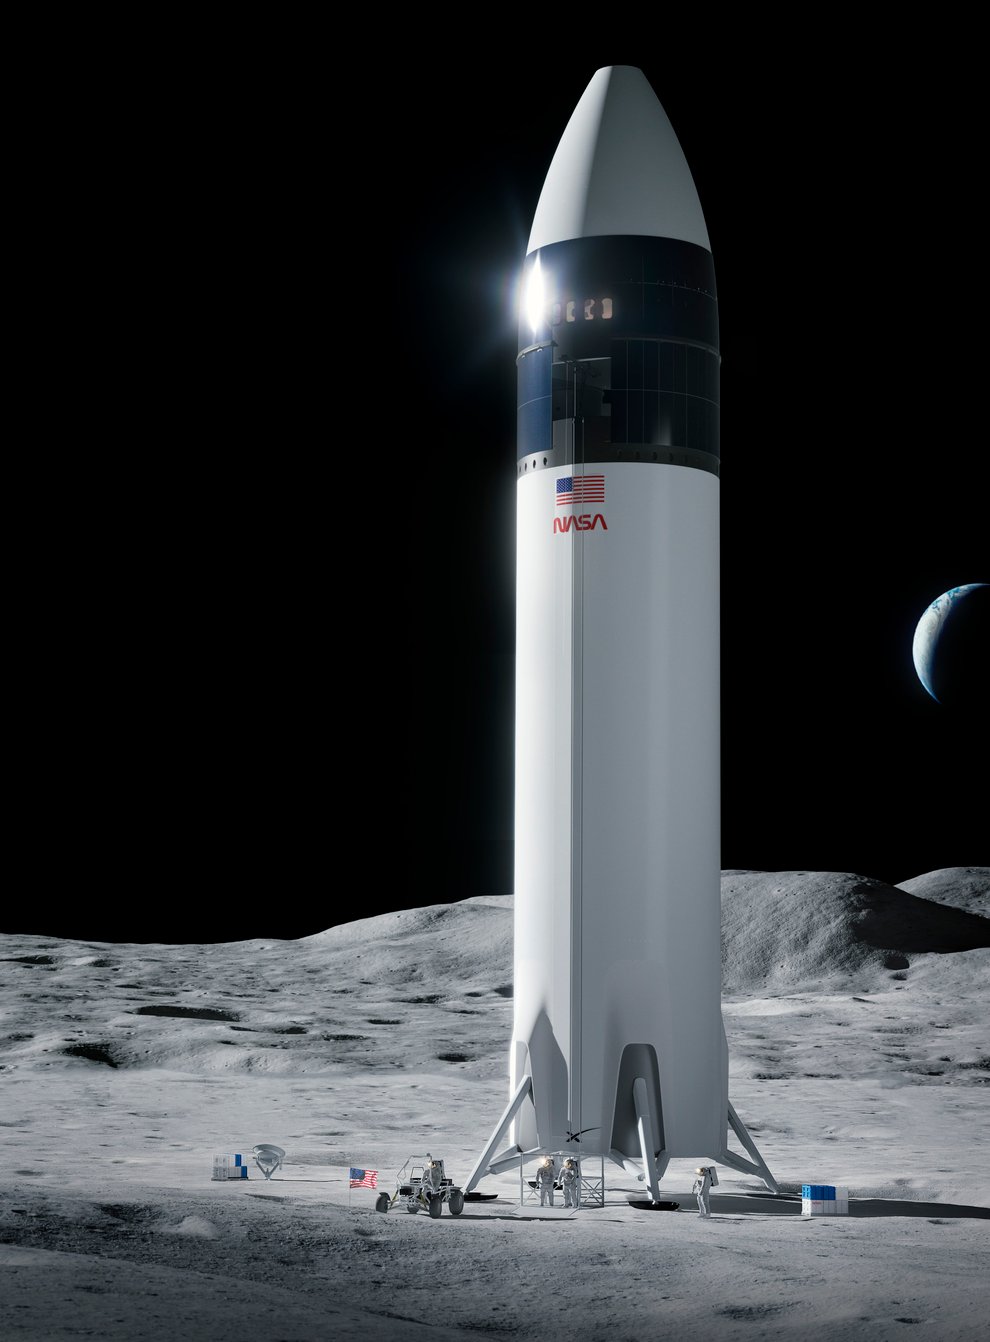 An illustration of the SpaceX Starship human lander design that will carry the first Nasa astronauts to the surface of the moon under the Artemis programme (SpaceX/NASA via AP)